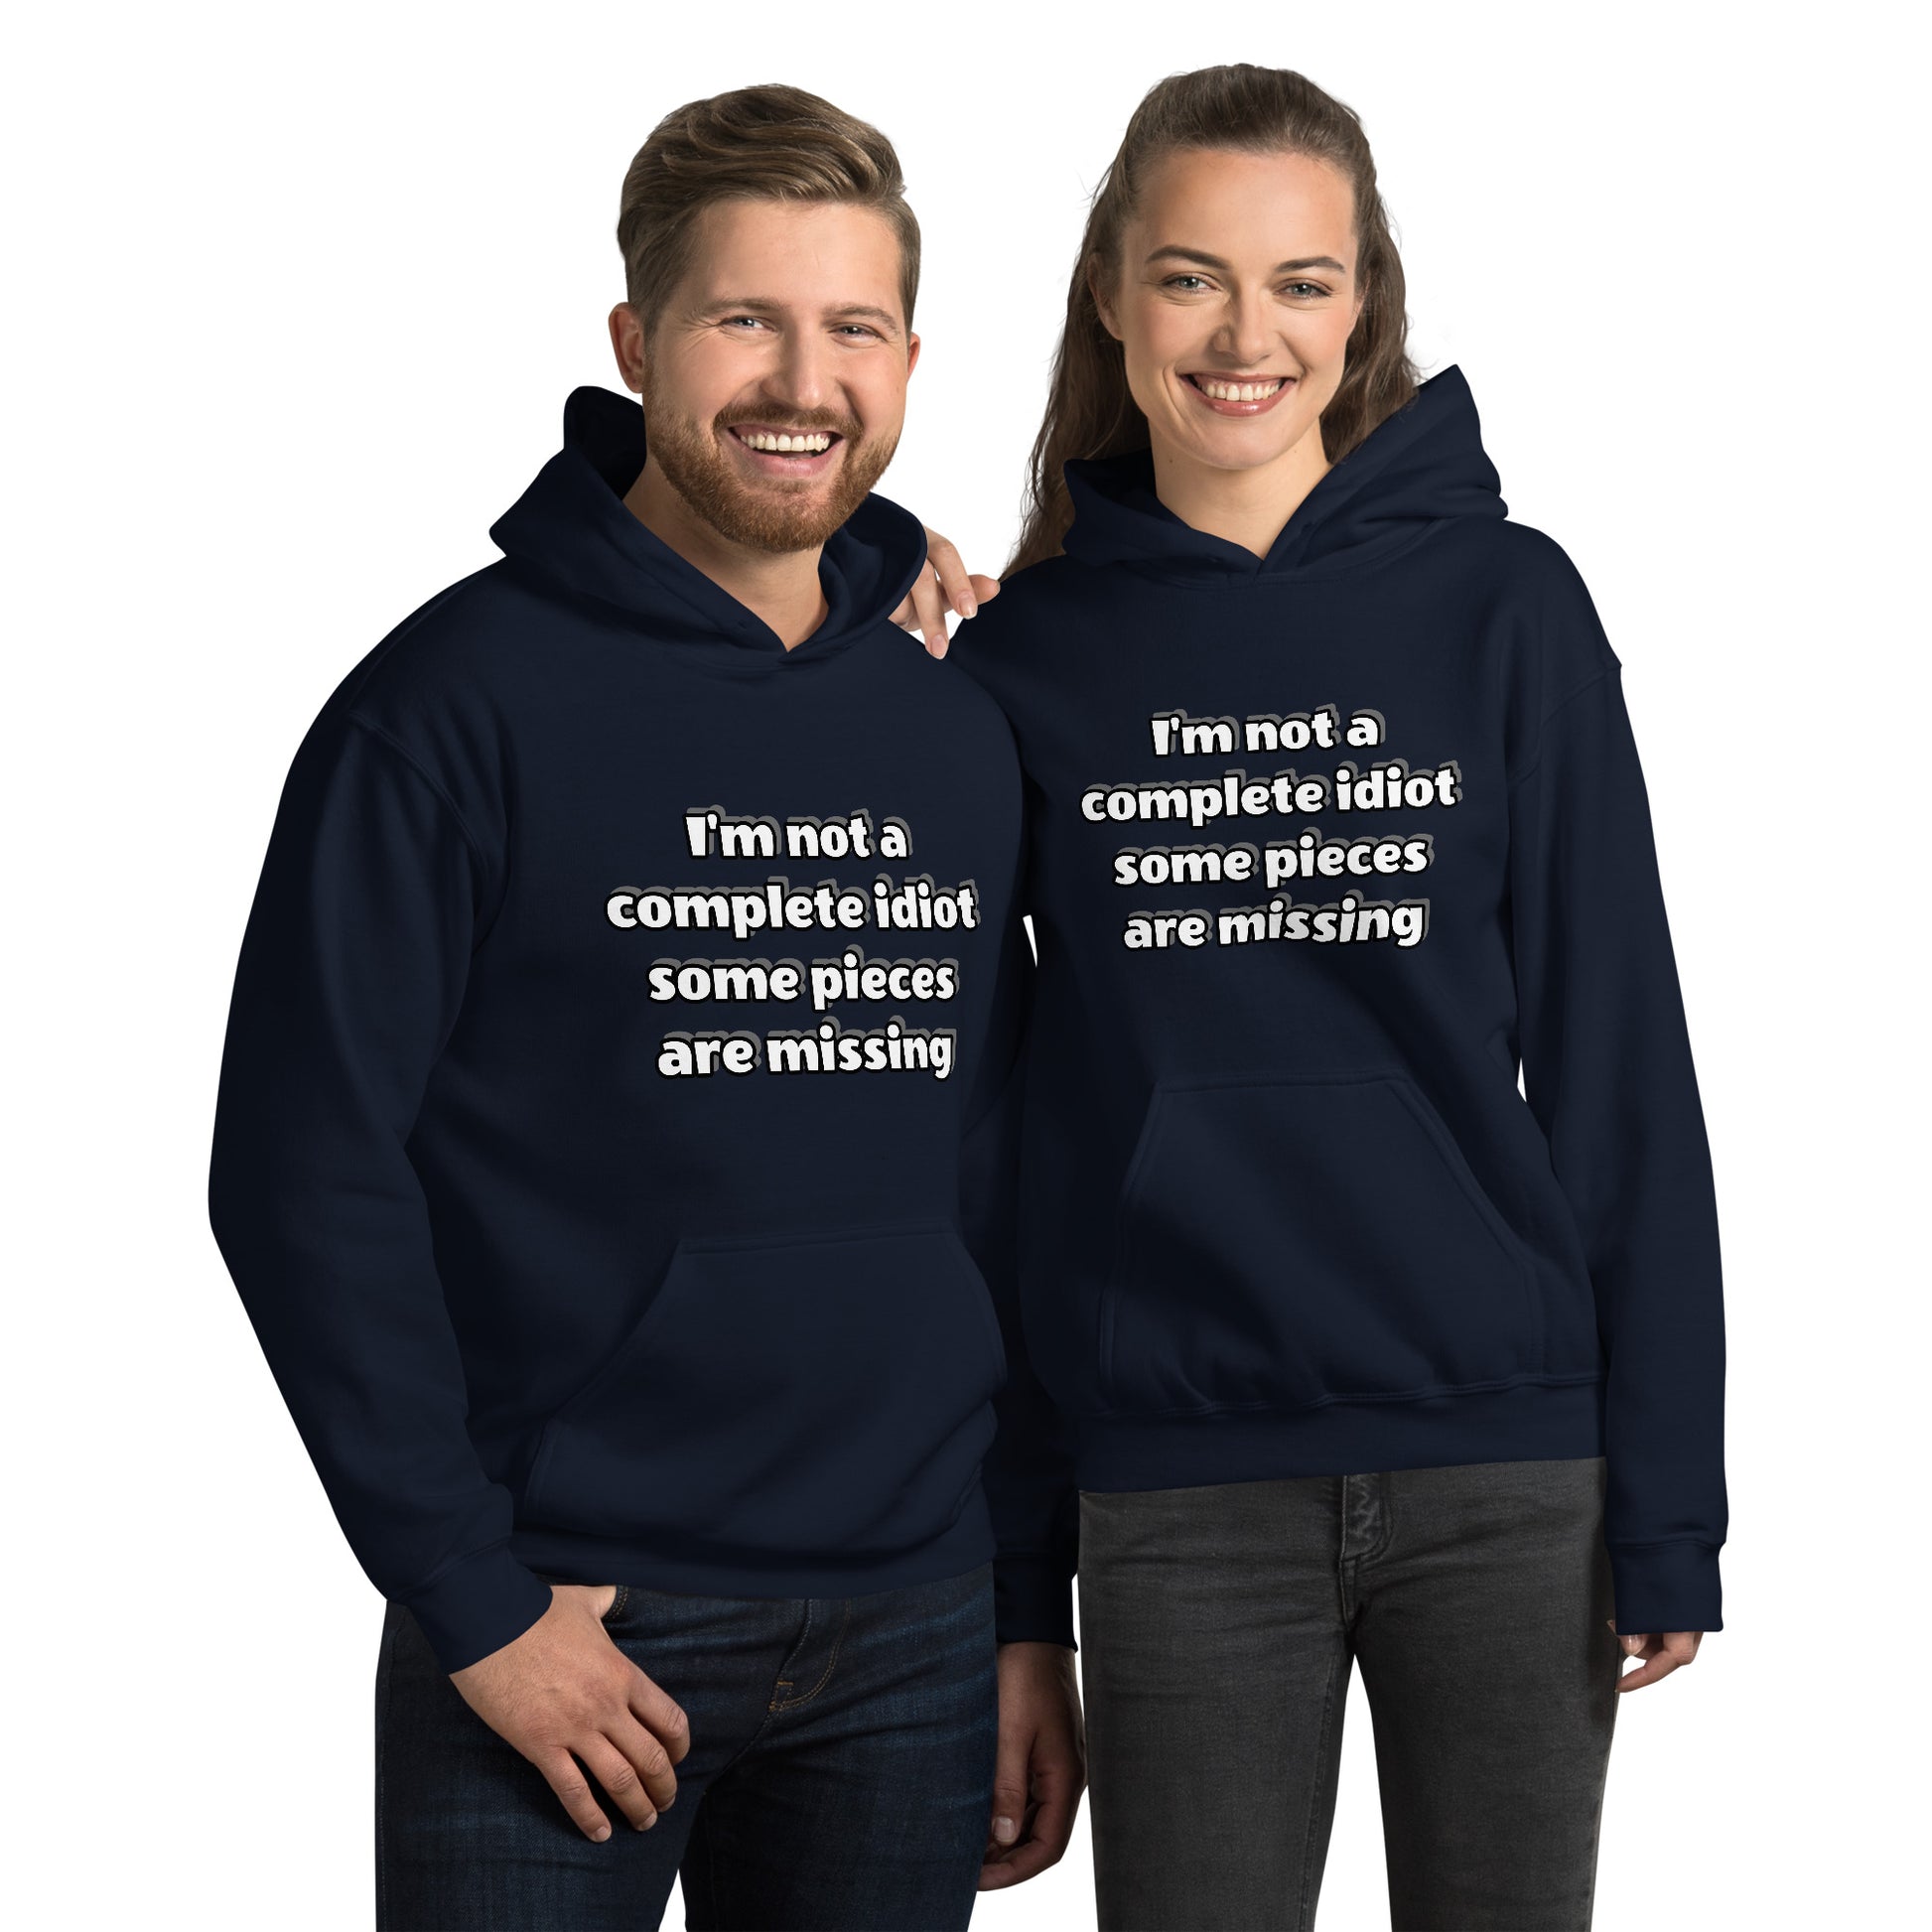 Men and women with navy blue hoodie with text “I’m not a complete idiot, some pieces are missing”